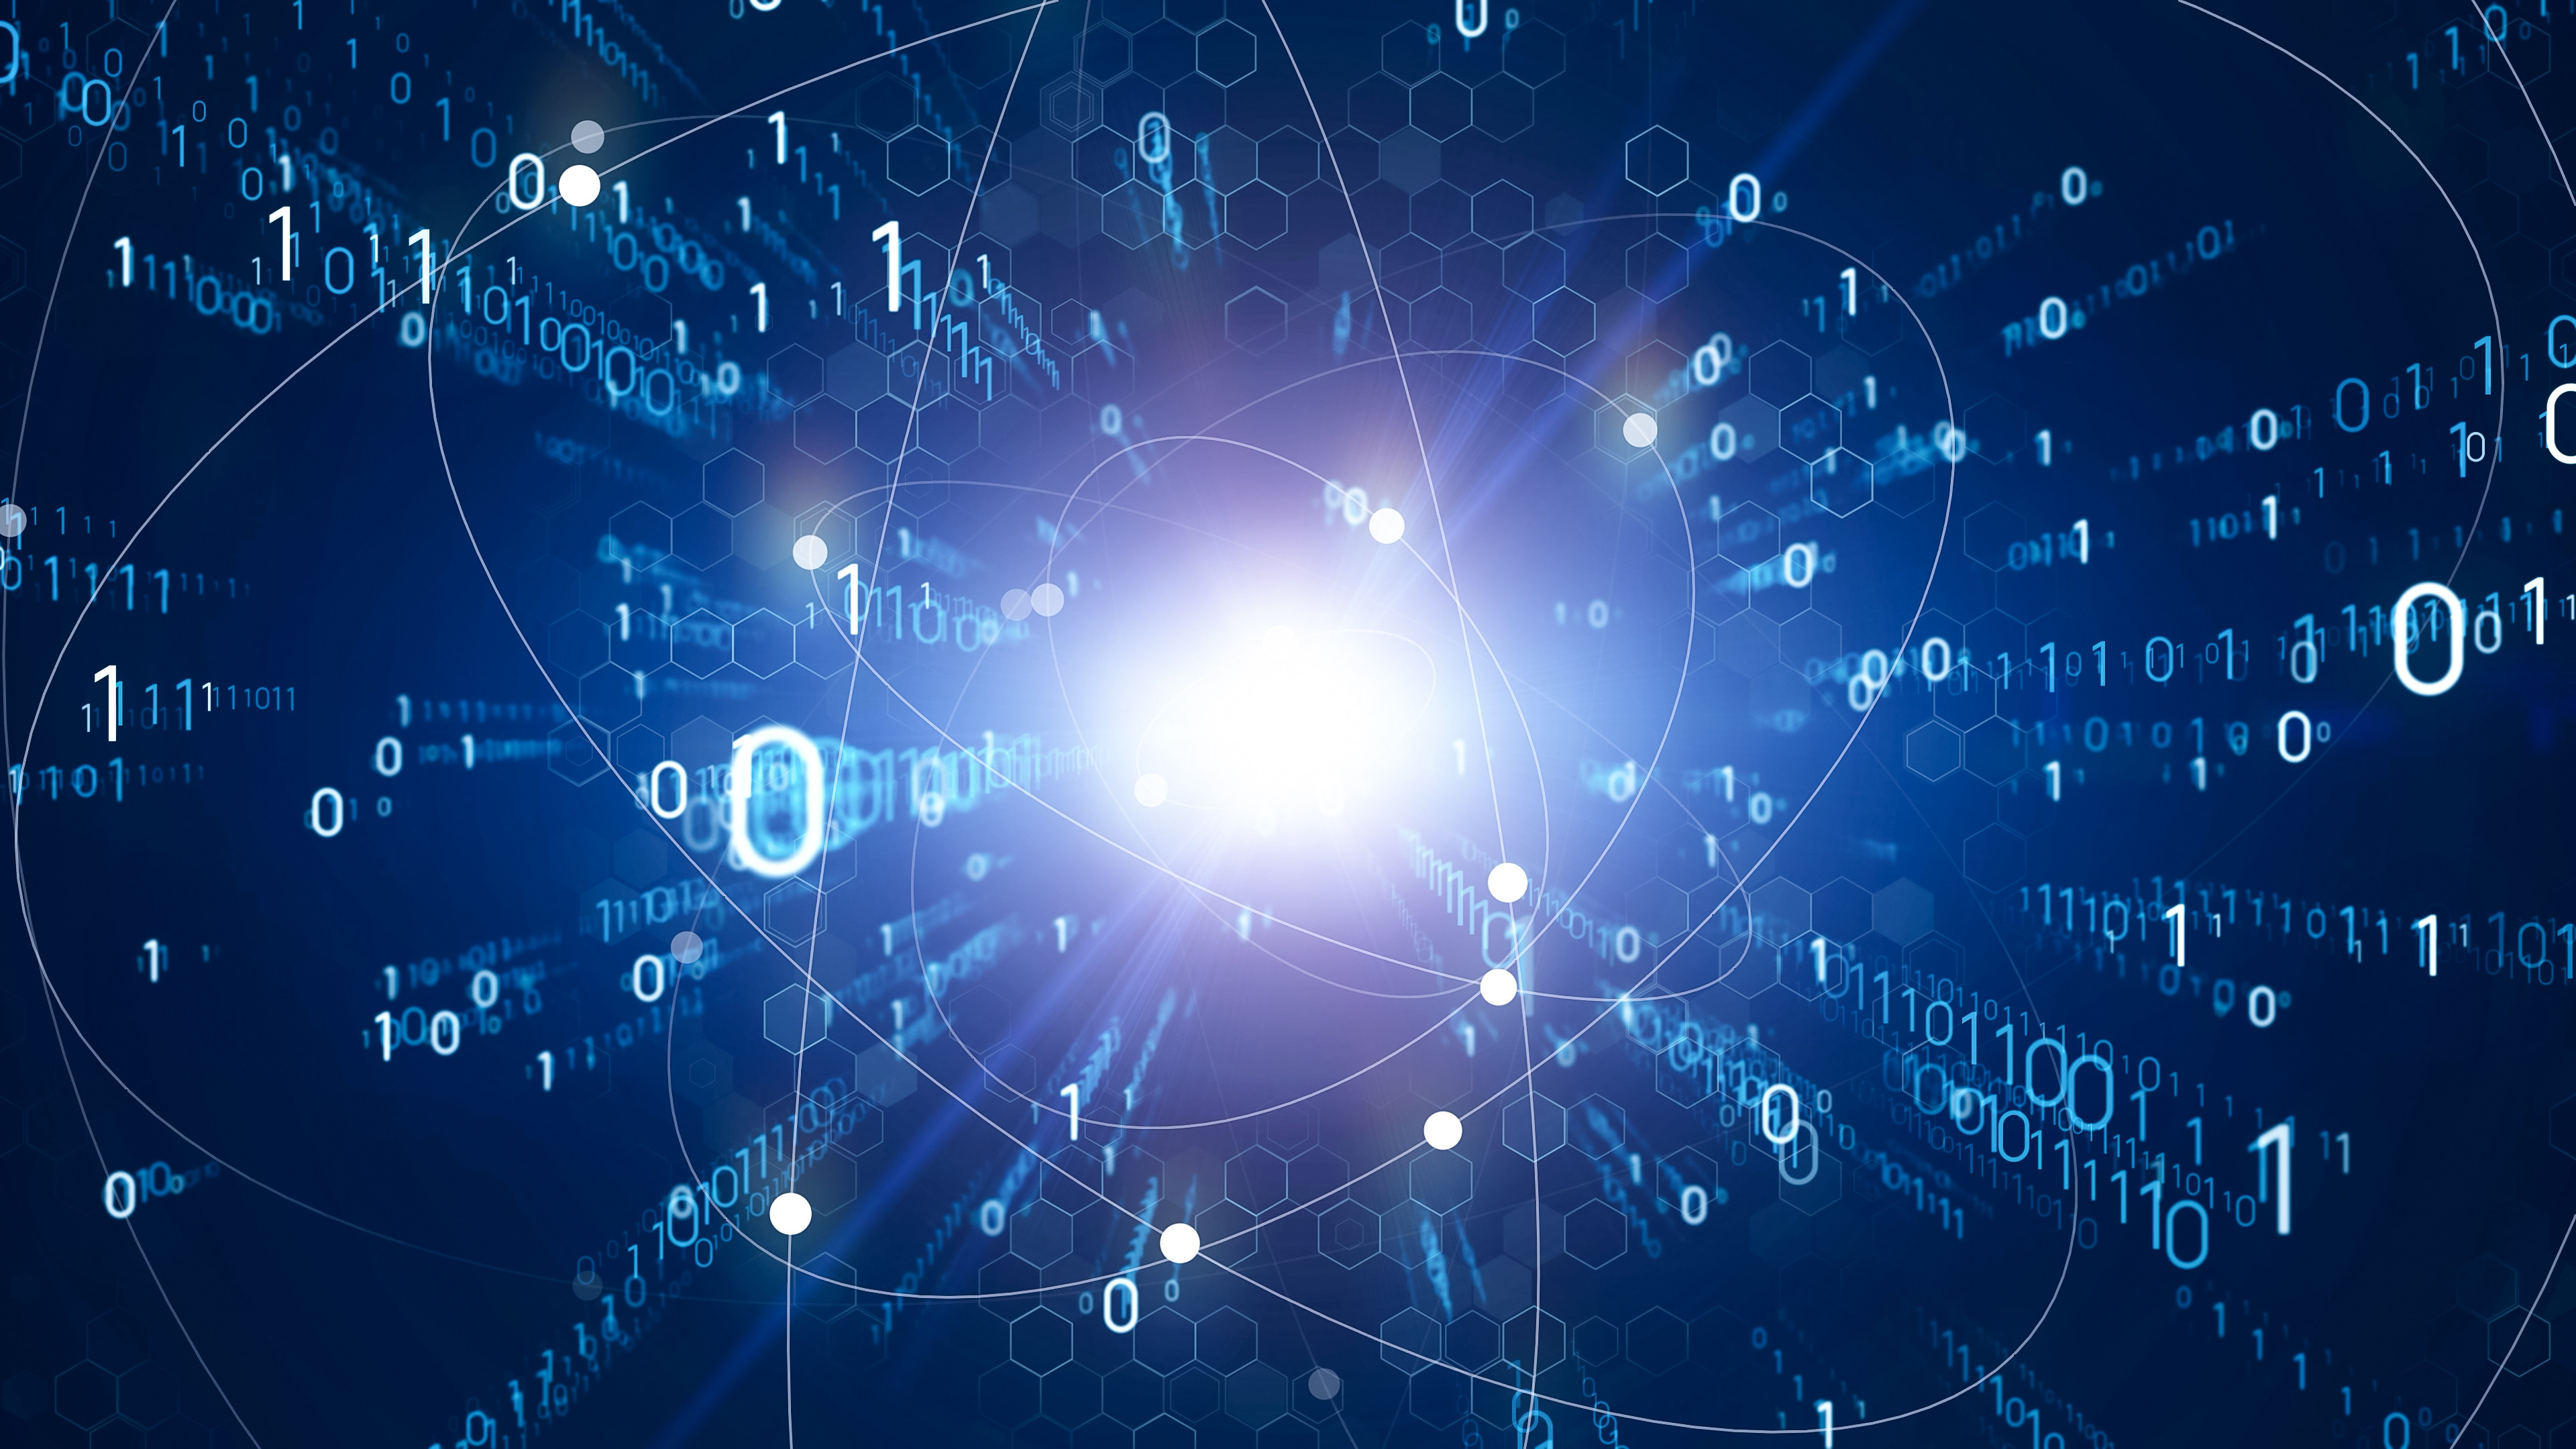 Researchers from the University of Science and Technology of China say they have achieved unprecedented speed with the light-based JiuZhang 3 quantum computer. Photo: Shutterstock